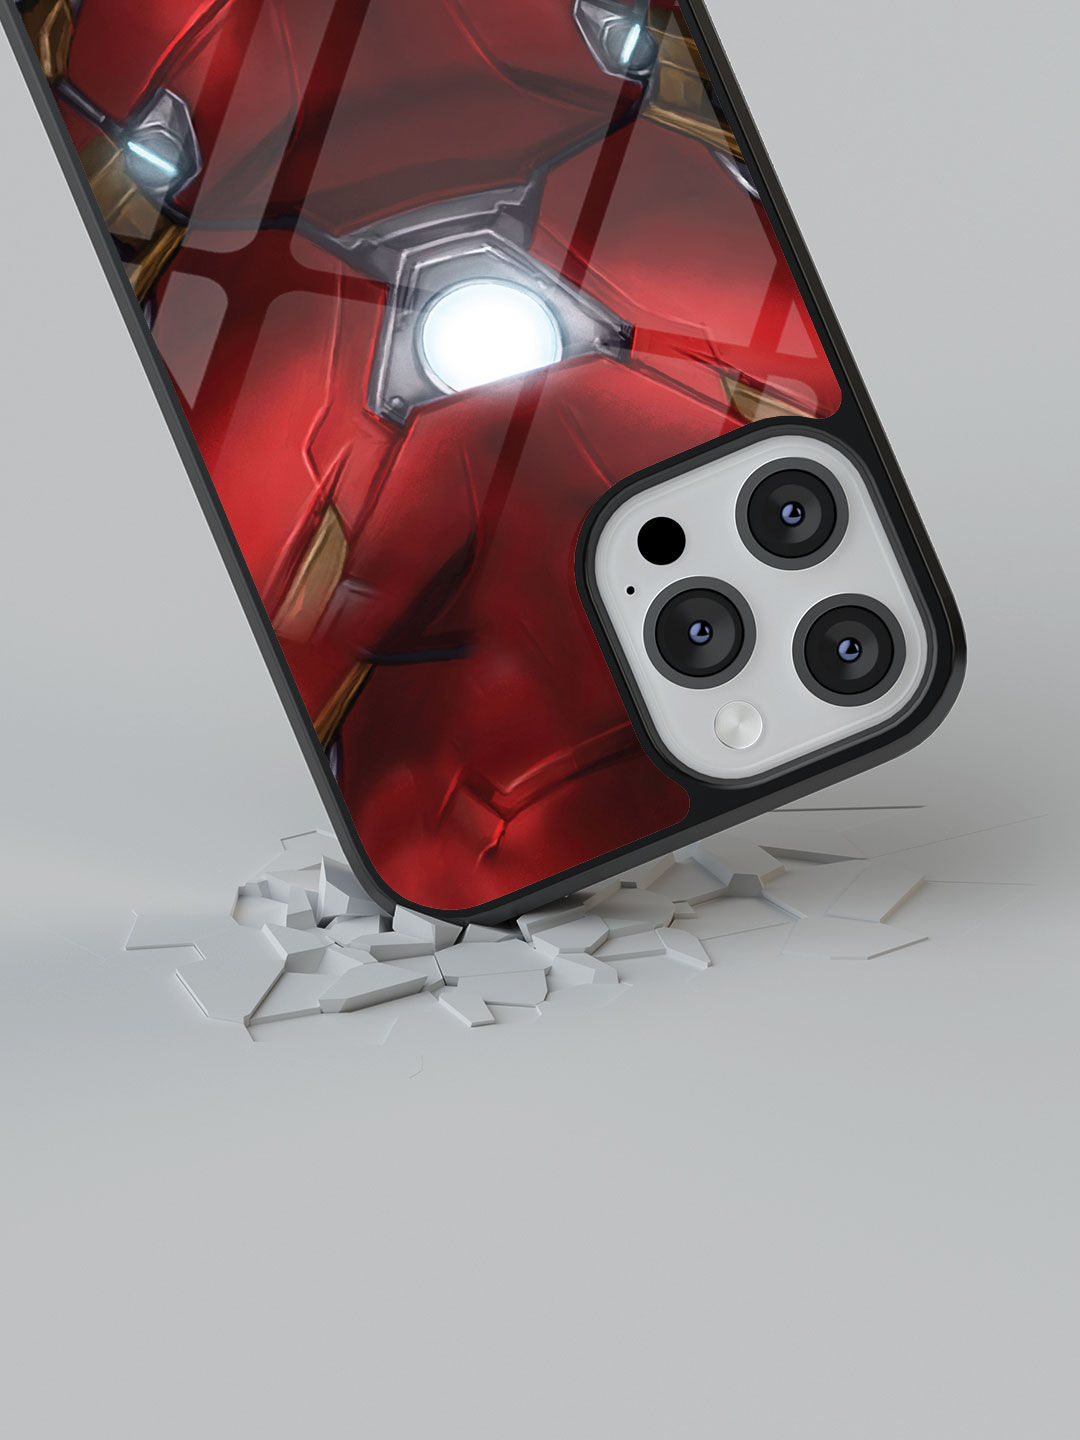 Suit up Ironman - Glass Case For iPhone 13 Pro Max